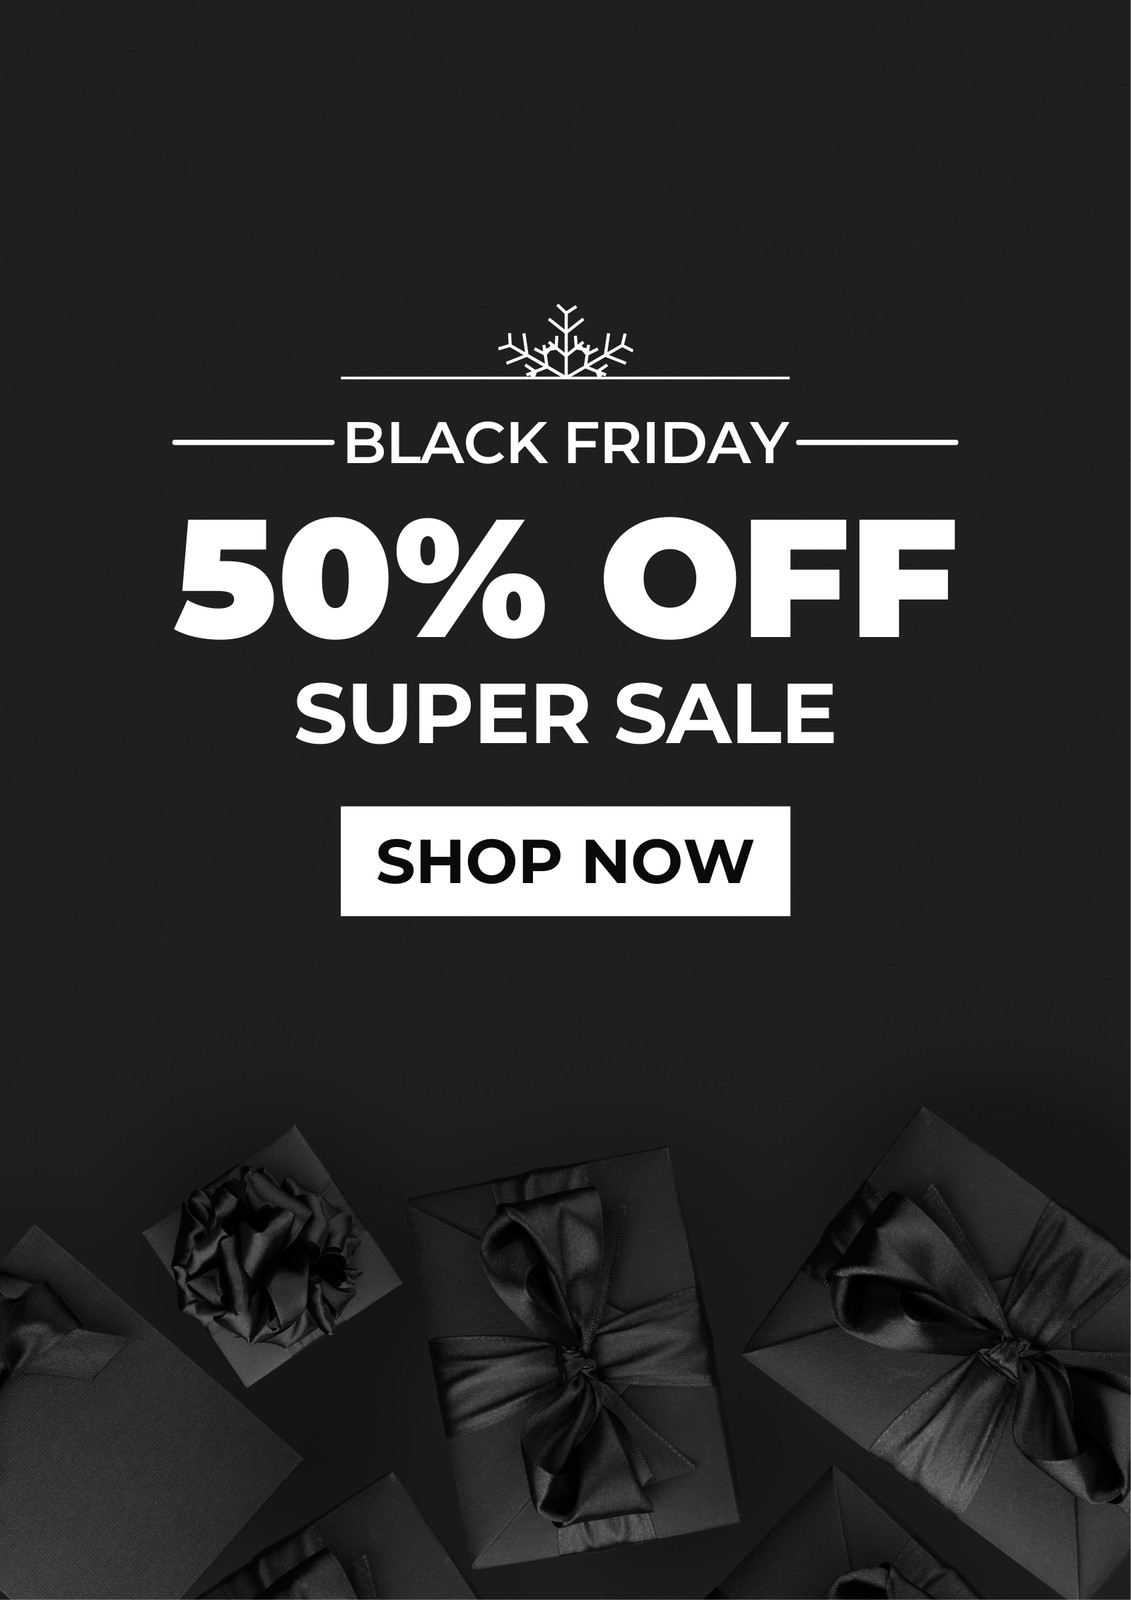 Page 8 - Free custom printable Black Friday poster templates | Canva